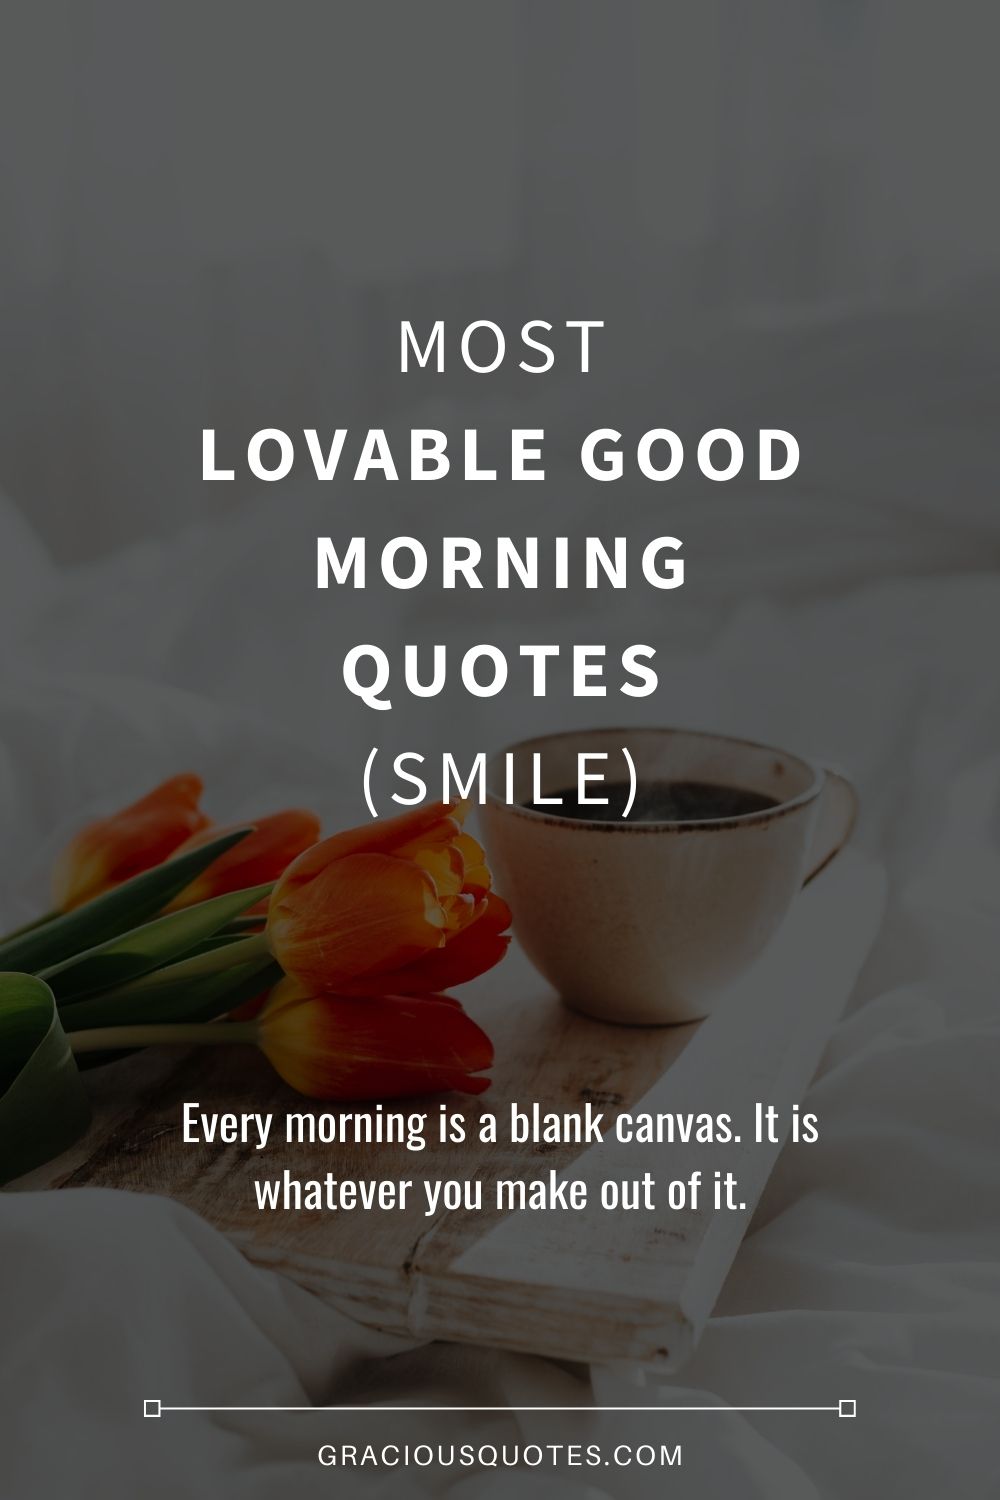 Most Lovable Good Morning Quotes (SMILE) - Gracious Quotes